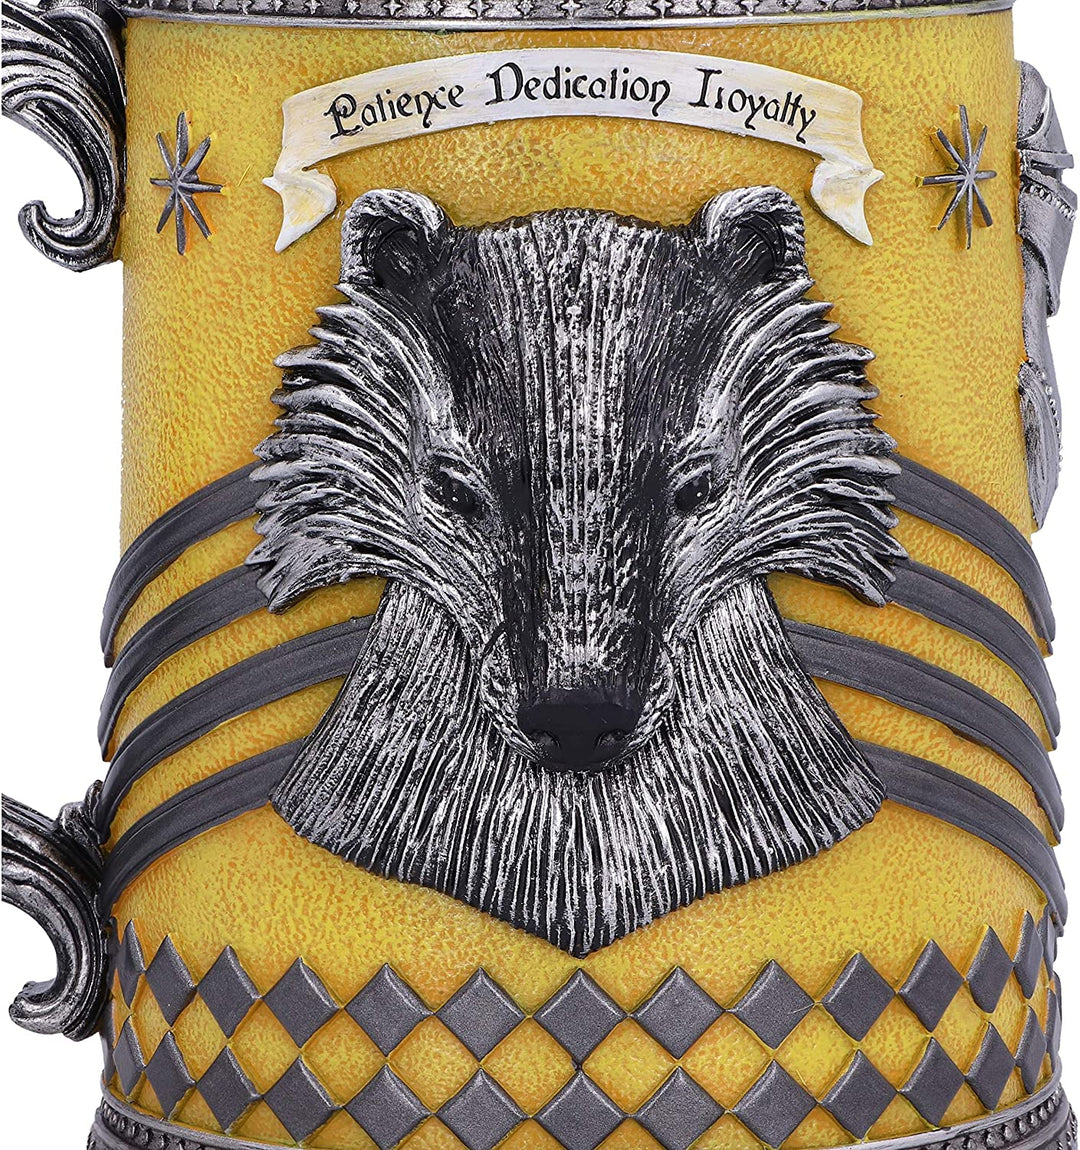 Nemesis Now Officially Licensed Harry Potter Hufflepuff Hogwarts House Collectible Tankard Yellow 15.5cm